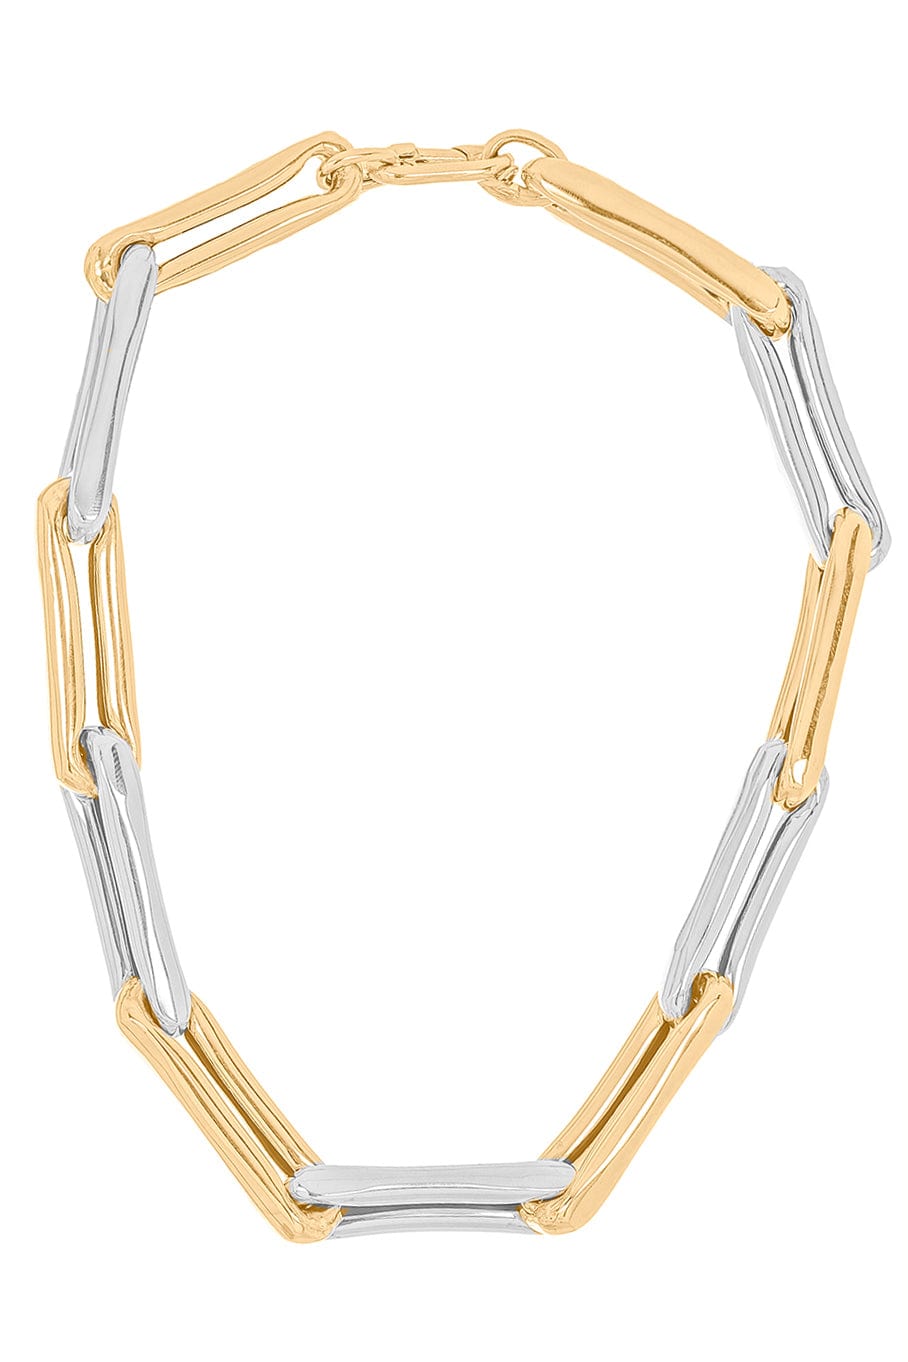 LAUREN RUBINSKI-LR3 - Extra Large Yellow and White Gold Necklace-YELLOW GOLD